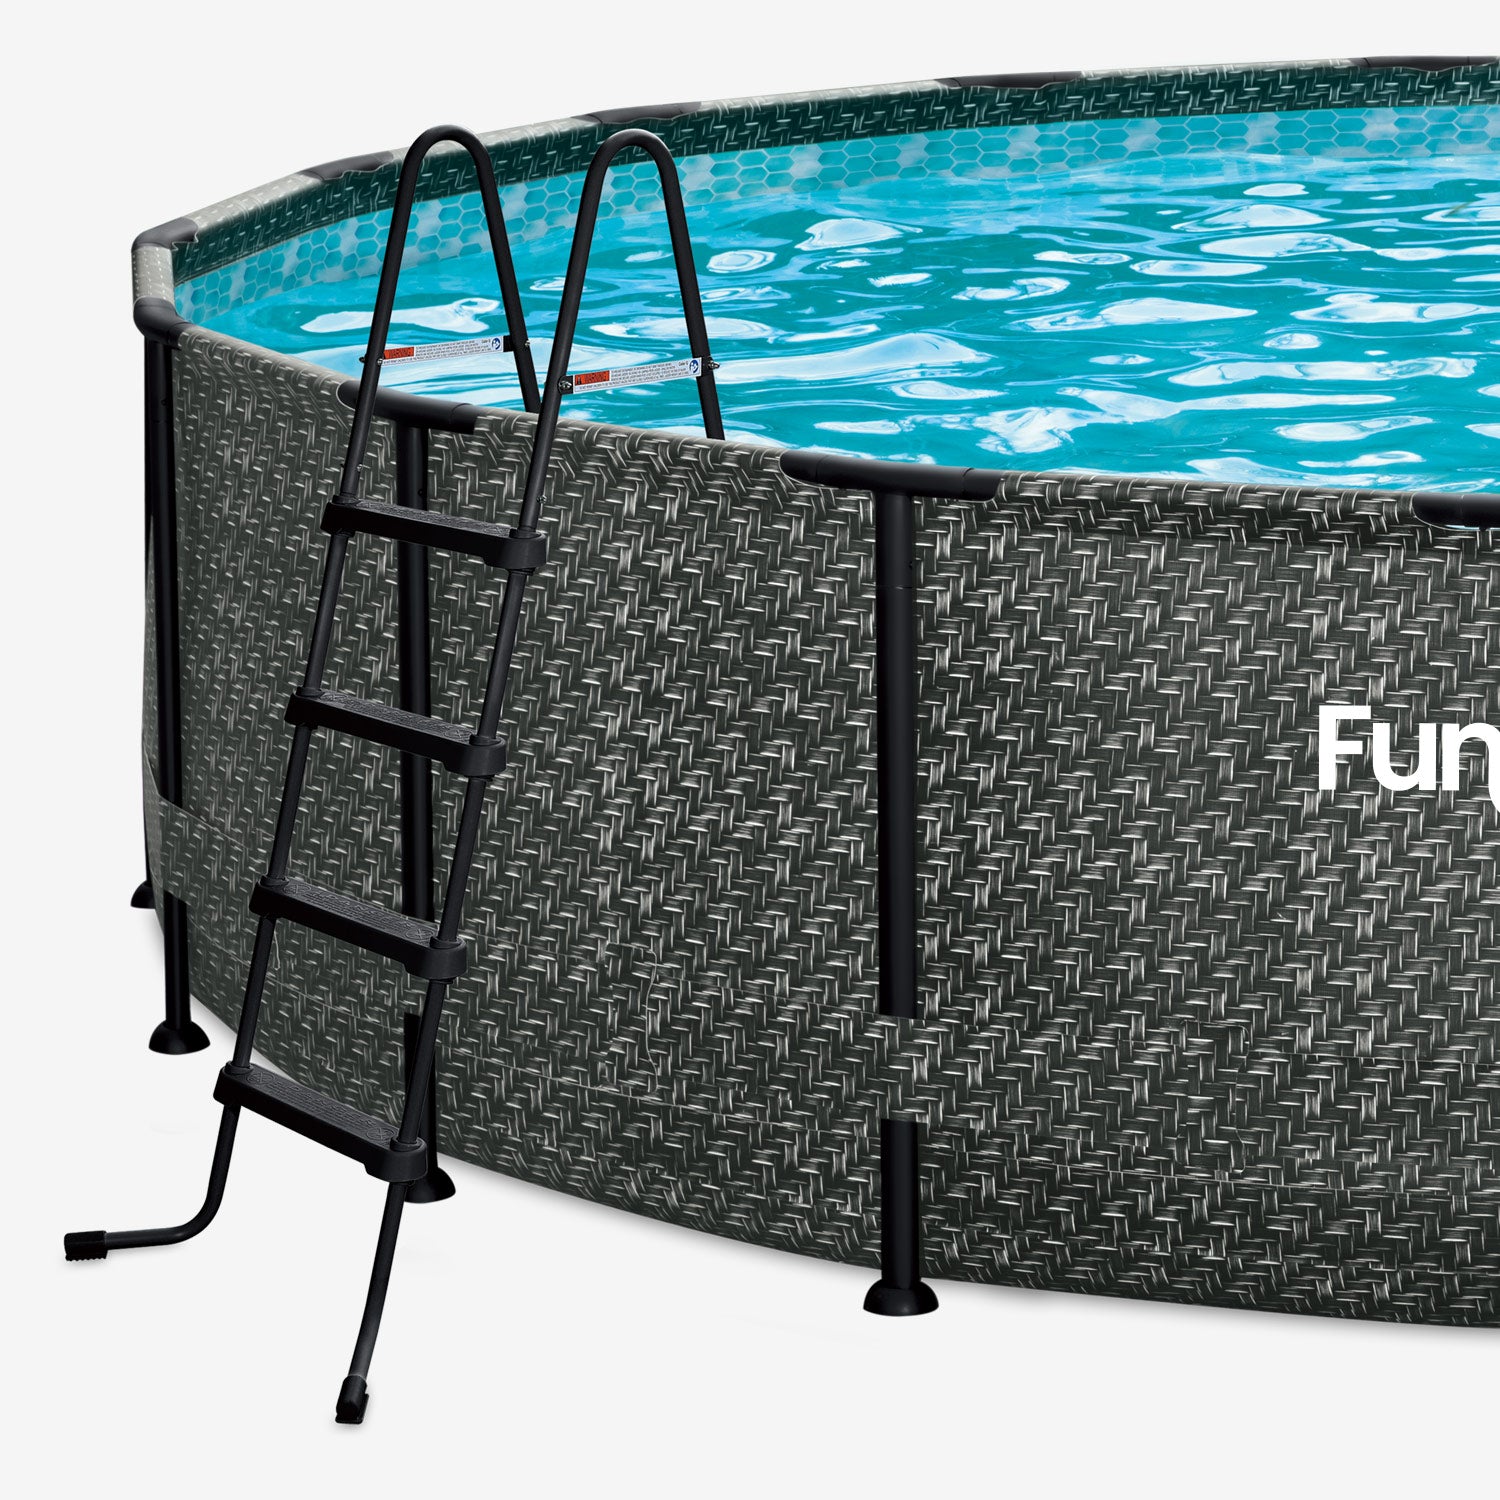 Funsicle 48" SureStep Ladder with Funsicle Oasis Designer Pool